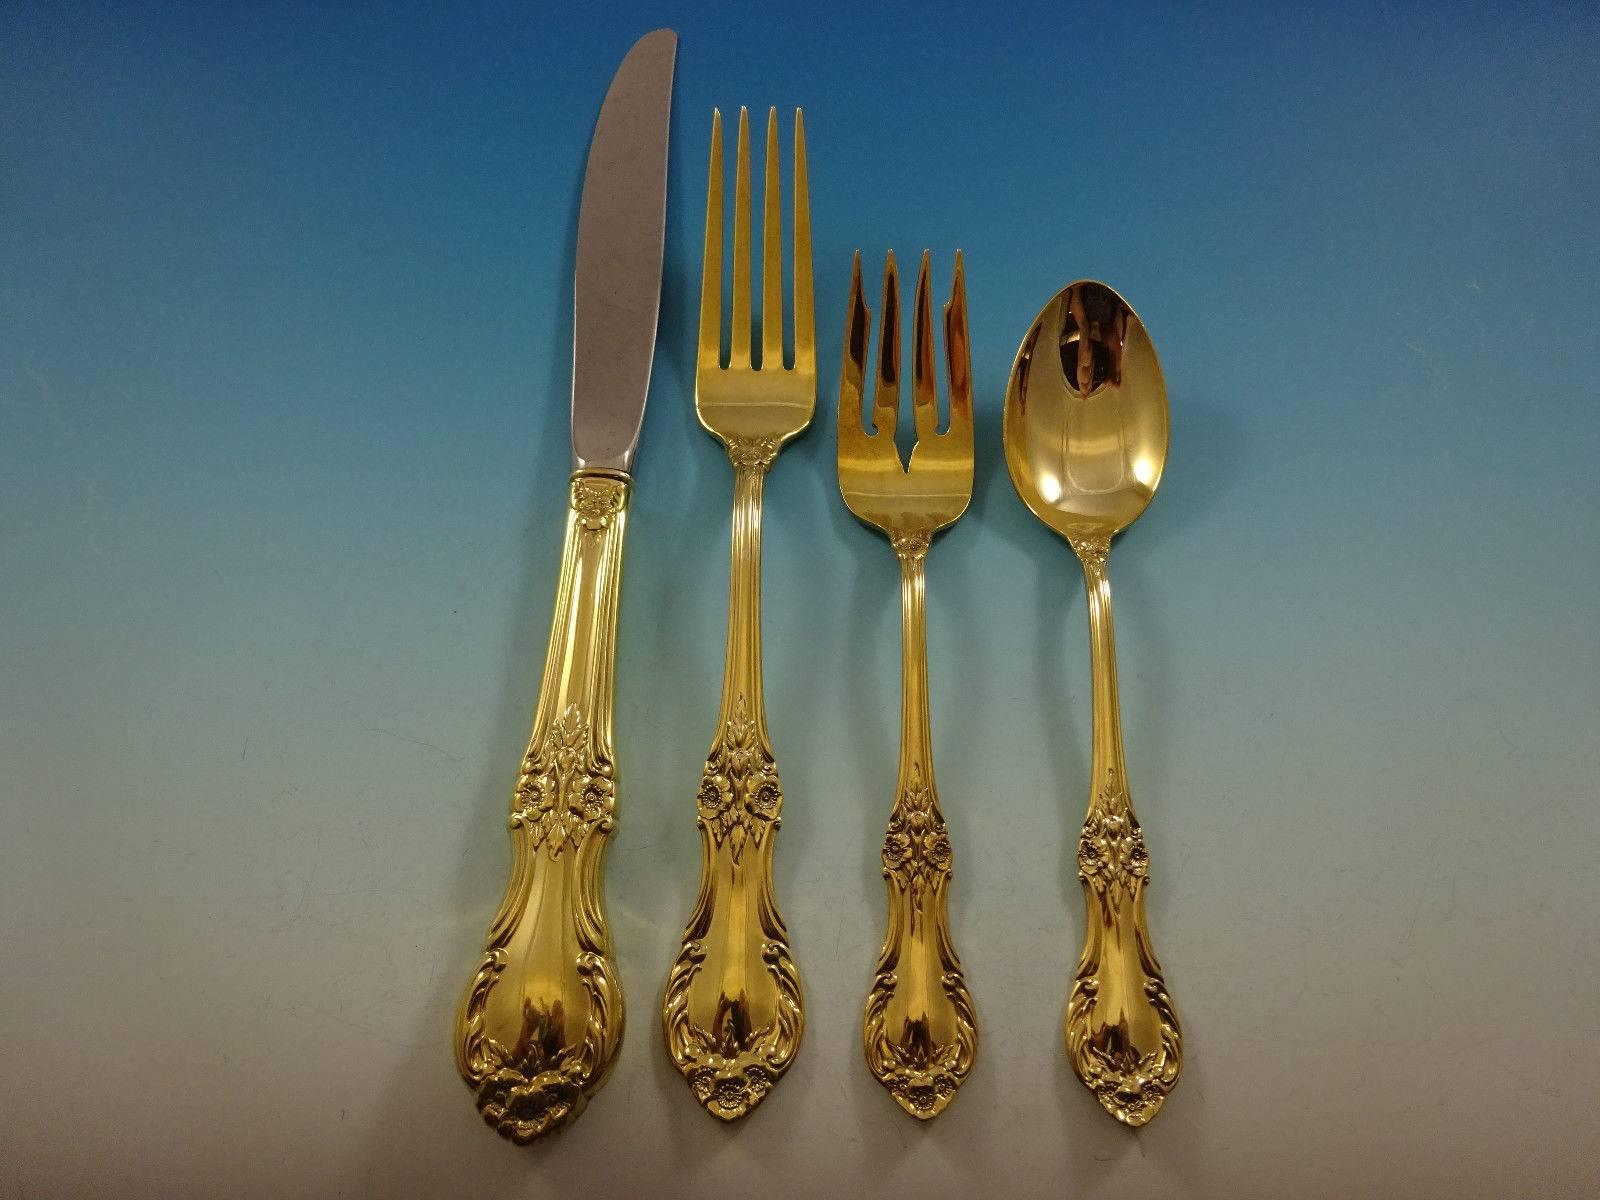 Gorgeous wild rose gold by International sterling silver flatware set - 48 pieces. Gold flatware is on trend and makes a bold statement on your table. 

This set is vermeil (completely gold-washed) and includes:
 
12 Knives, 9 3/8